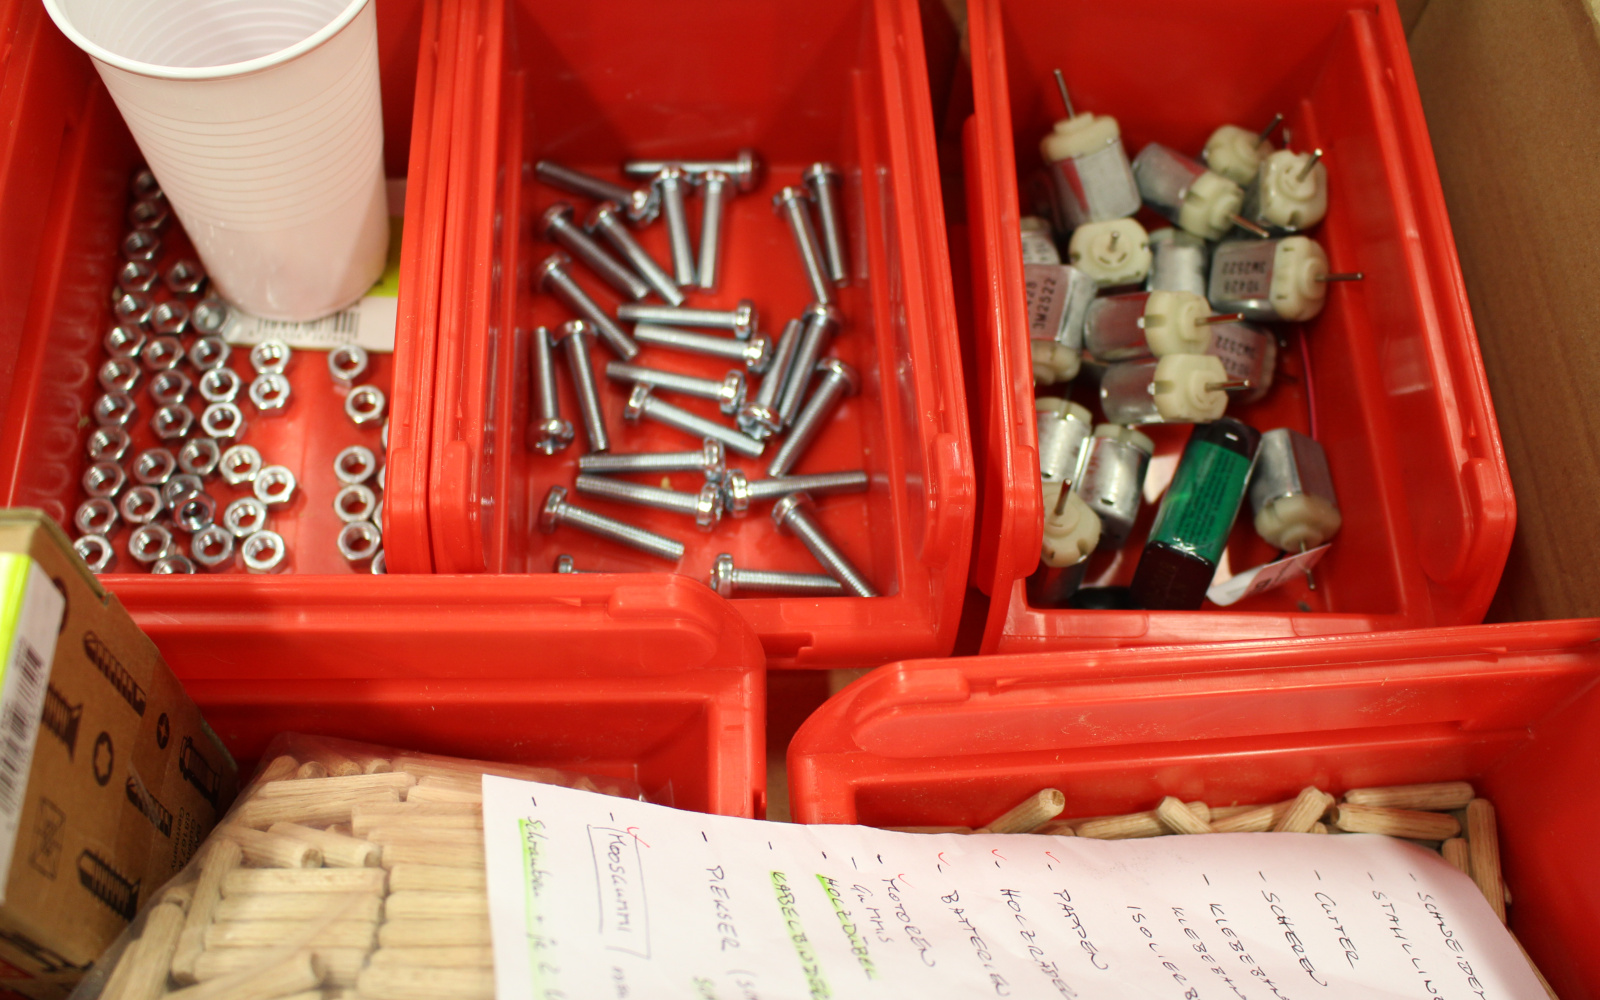 Some red boxes for crafting equipment in which are different screws, nails or little motors.